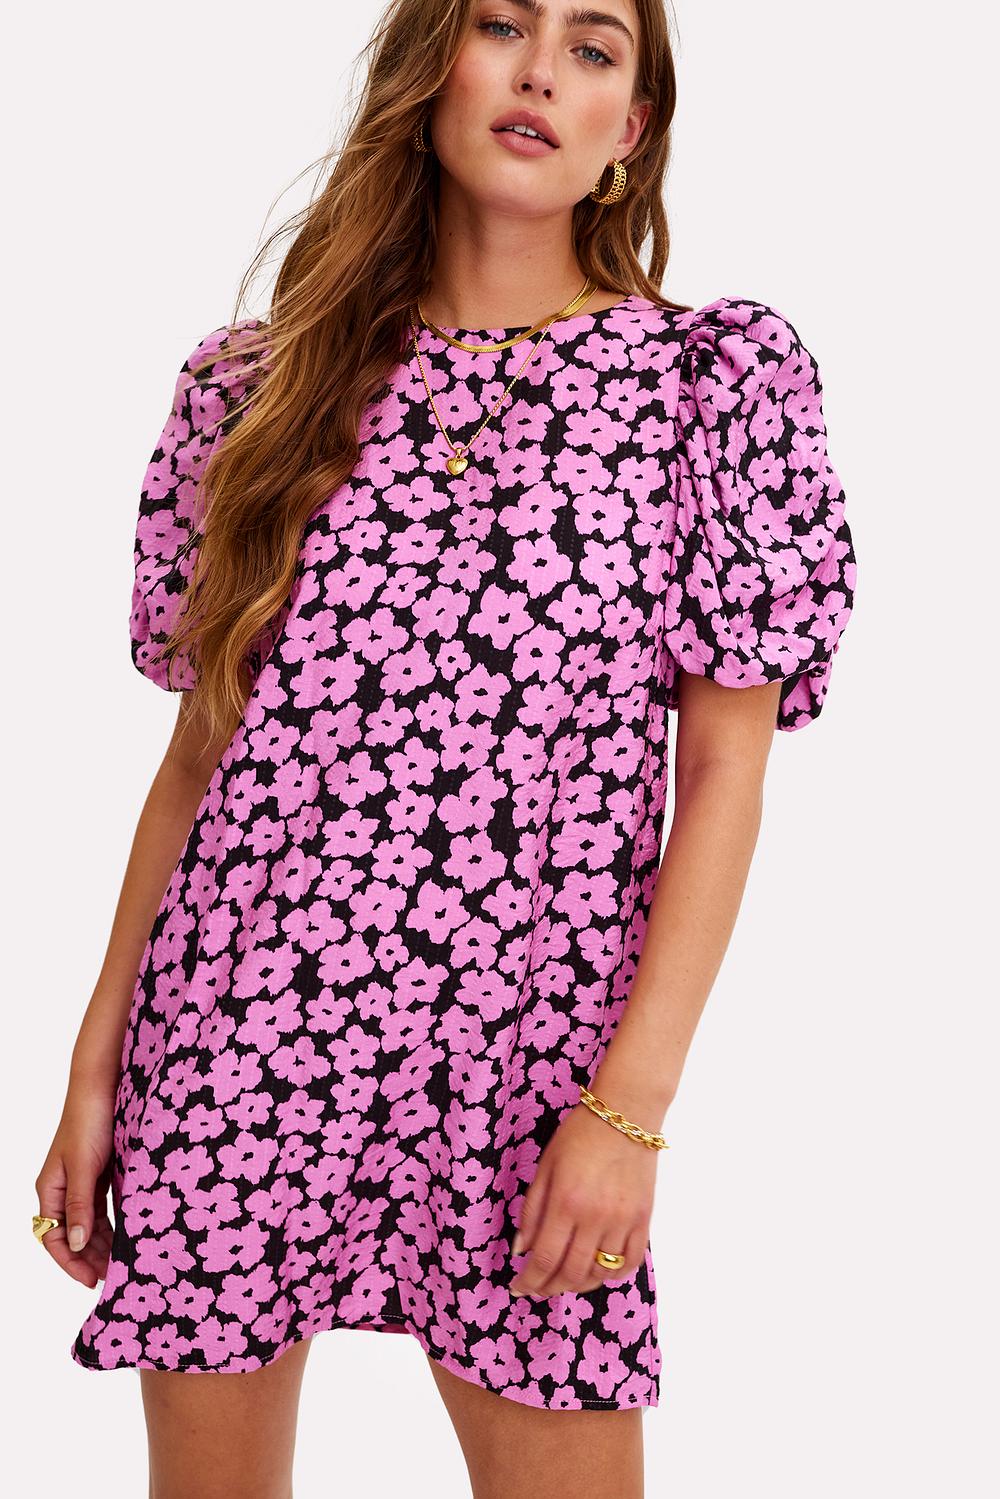 Pink dress with floral print